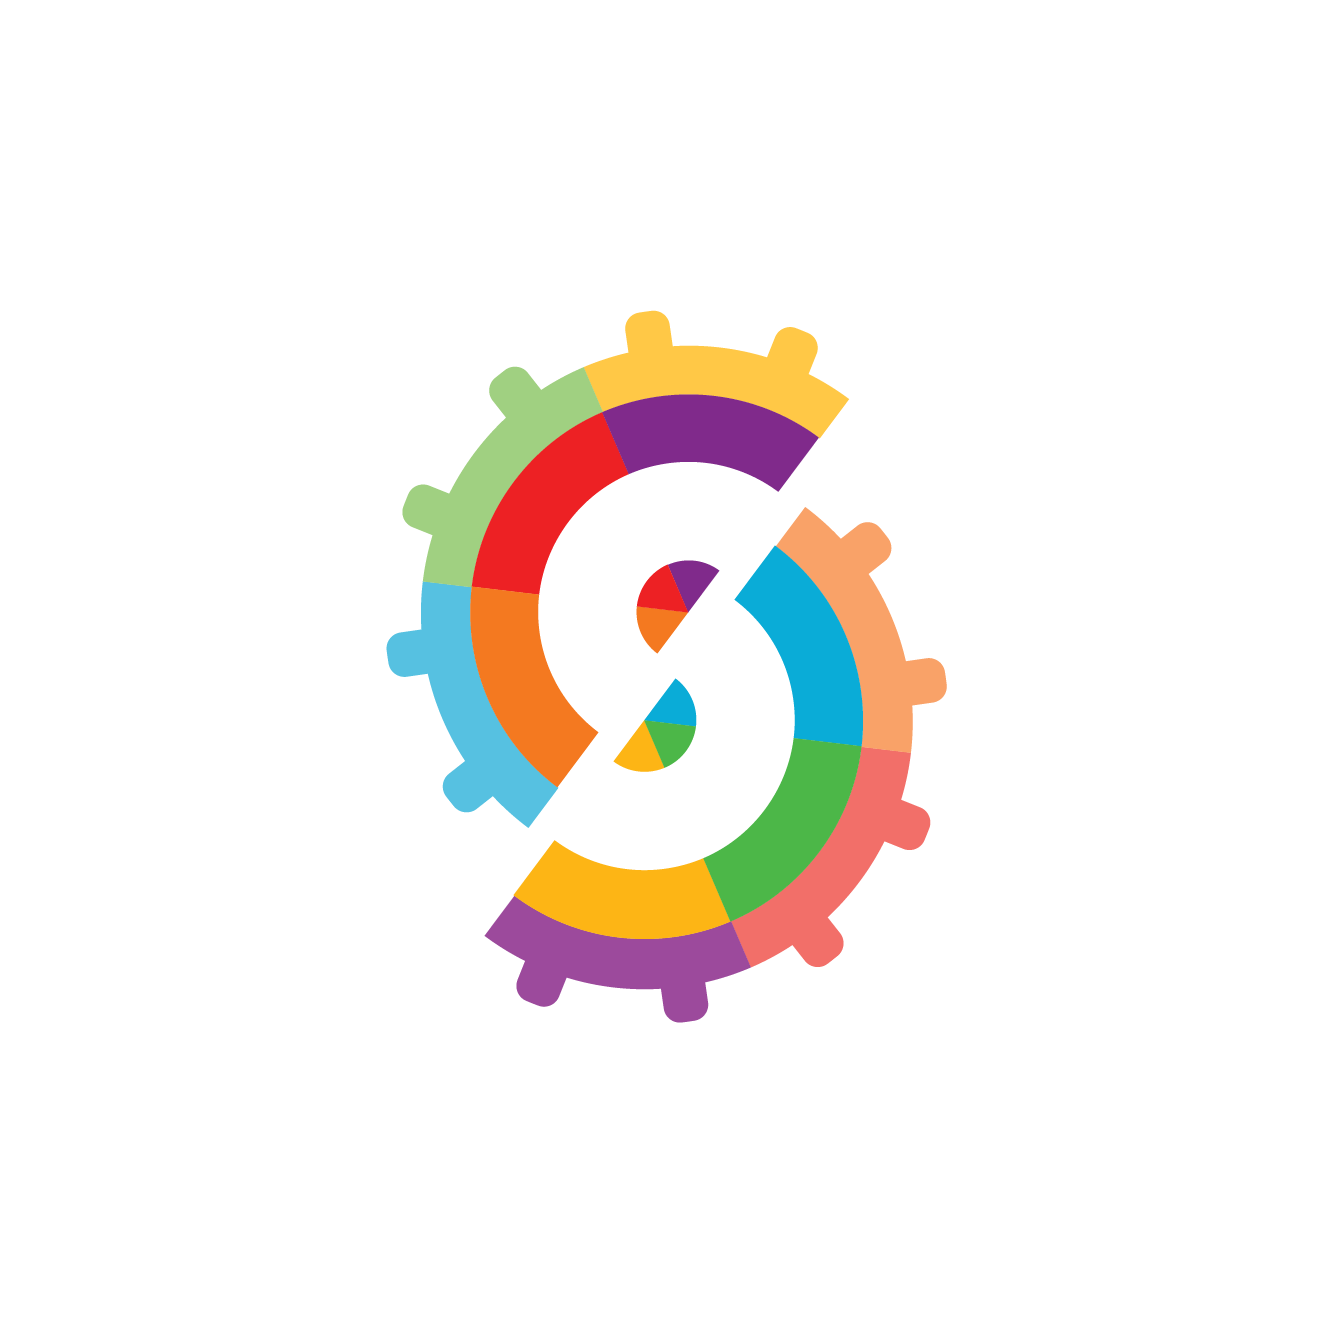 brand design by blade_feature logo_studio cogs icon.png